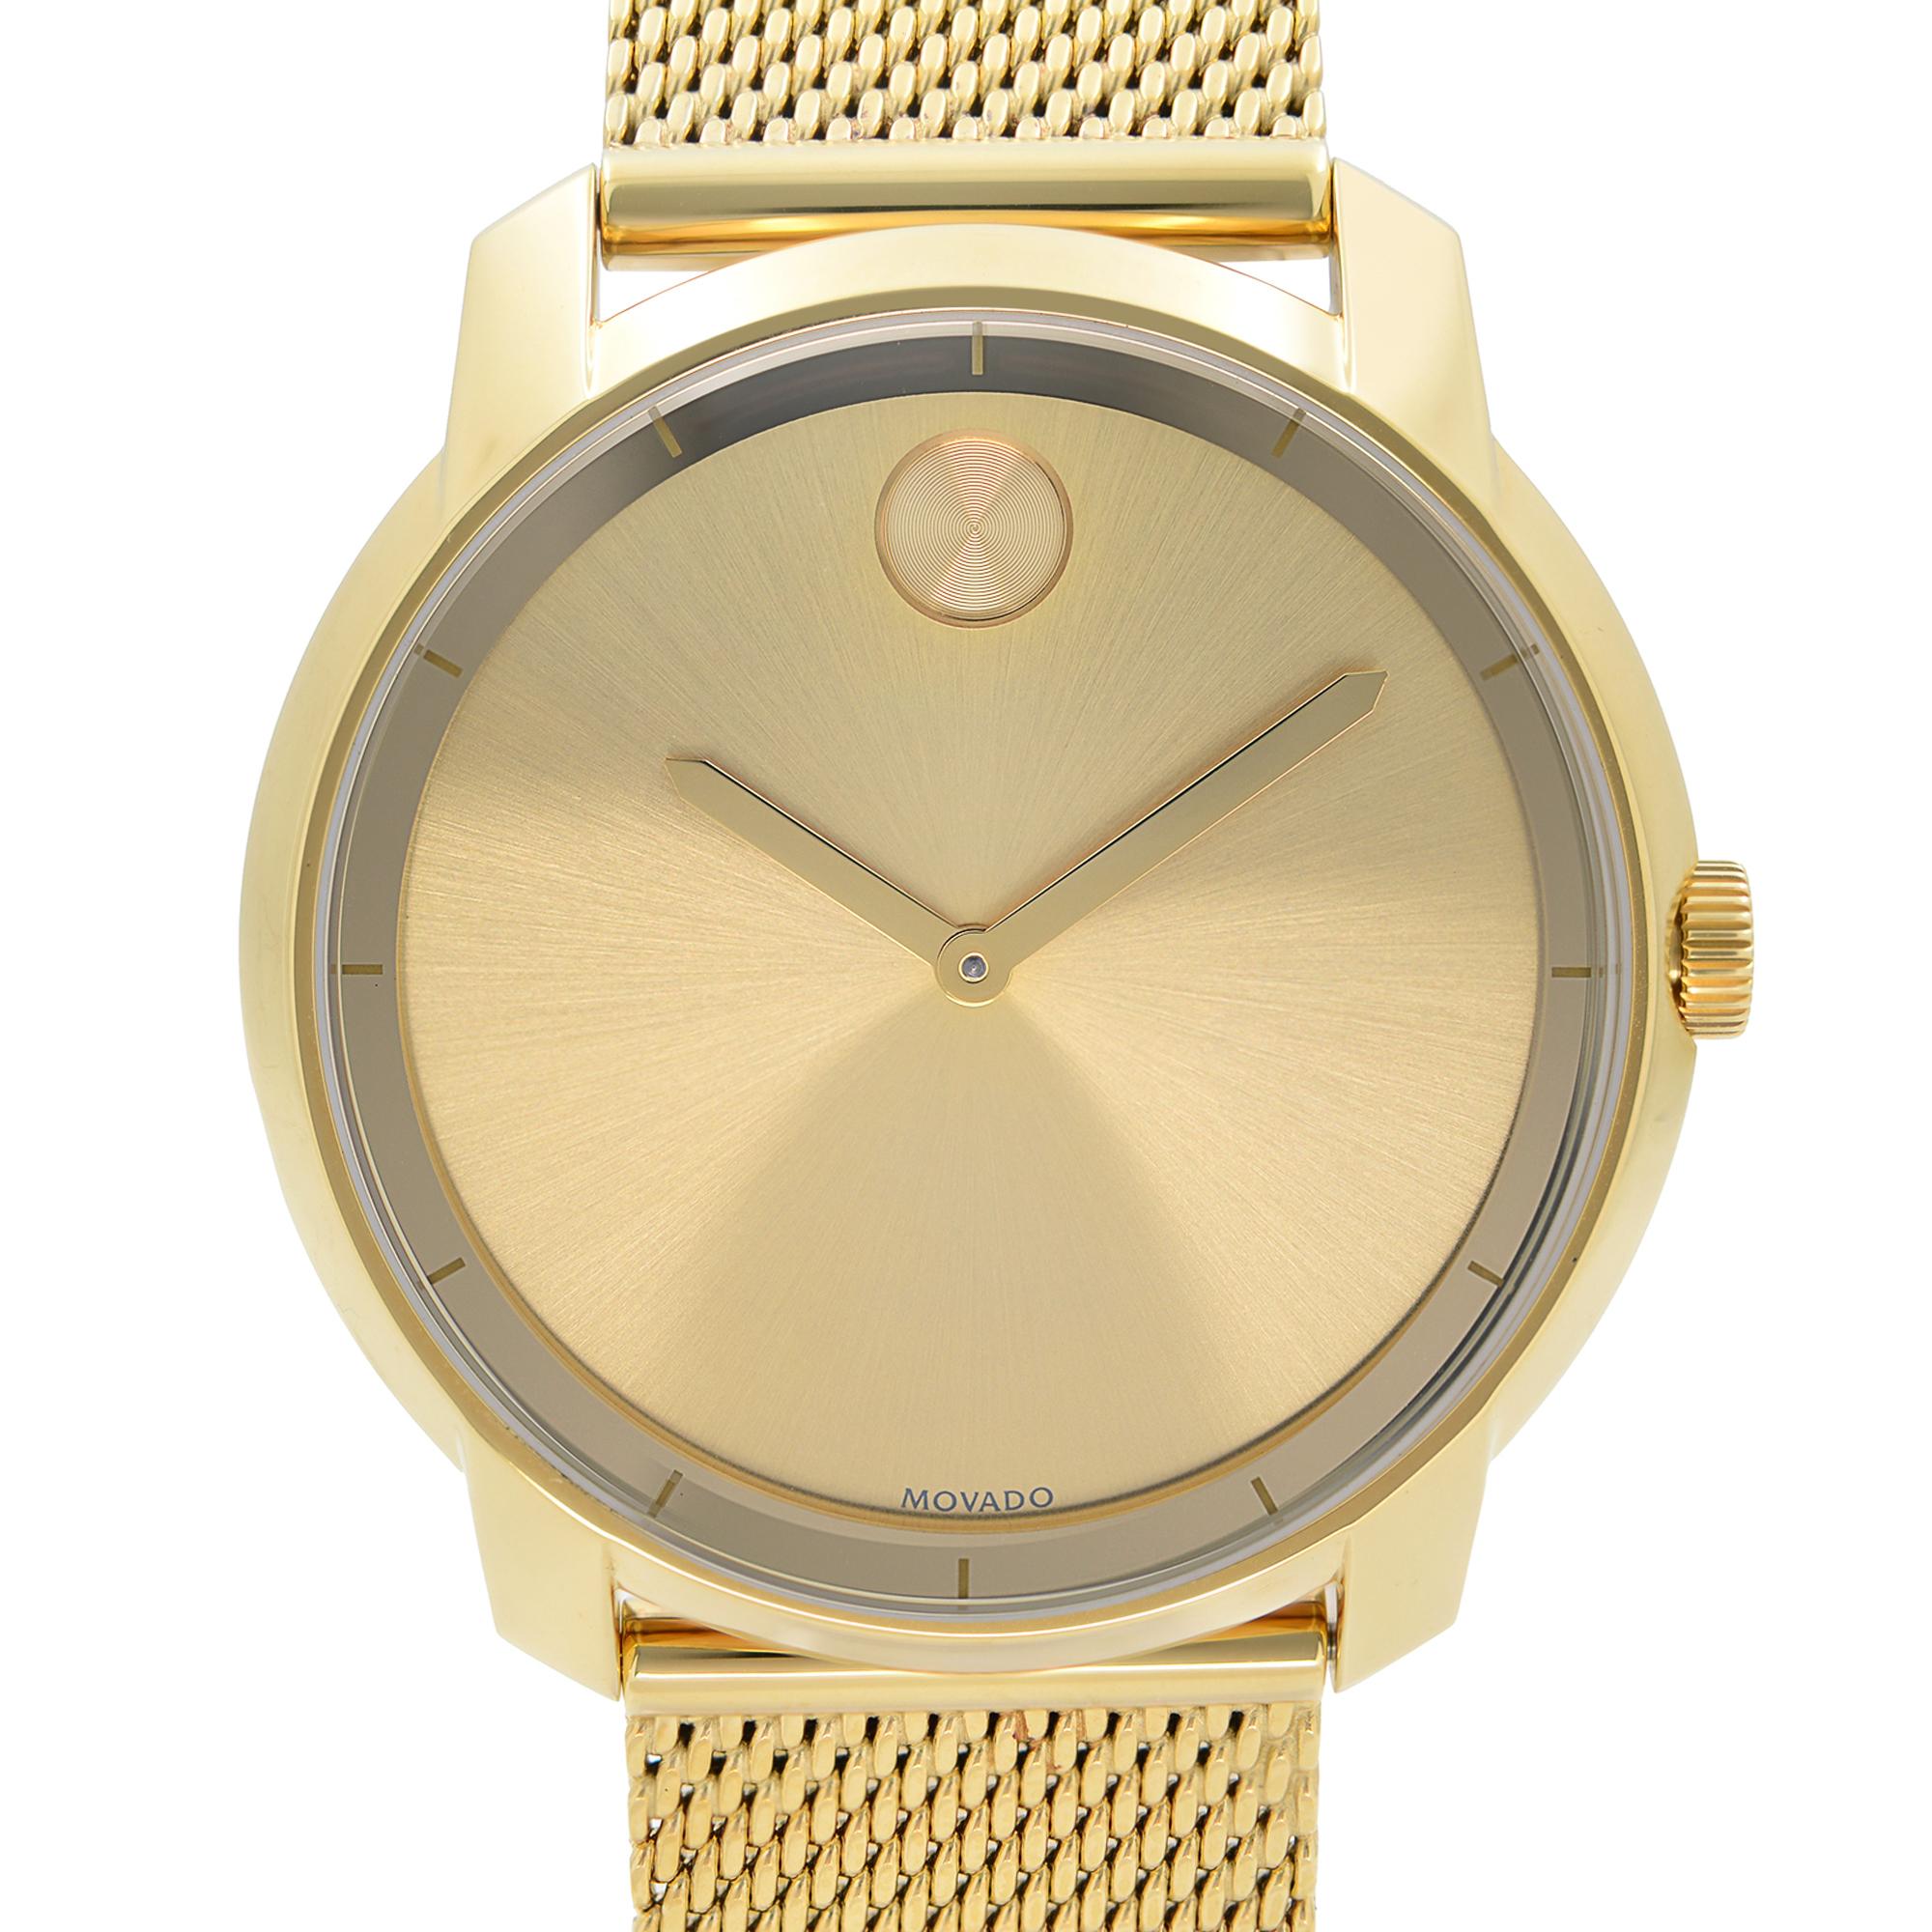 Display Model Movado Bold 3600373. The Watch Has Minor Blemishes Due to Store Handling. Original Box and Papers are Included. Covered by 1-year Chronostore Warranty. 
Details:
Brand Movado
Type Wristwatch
Department Men
Model Number